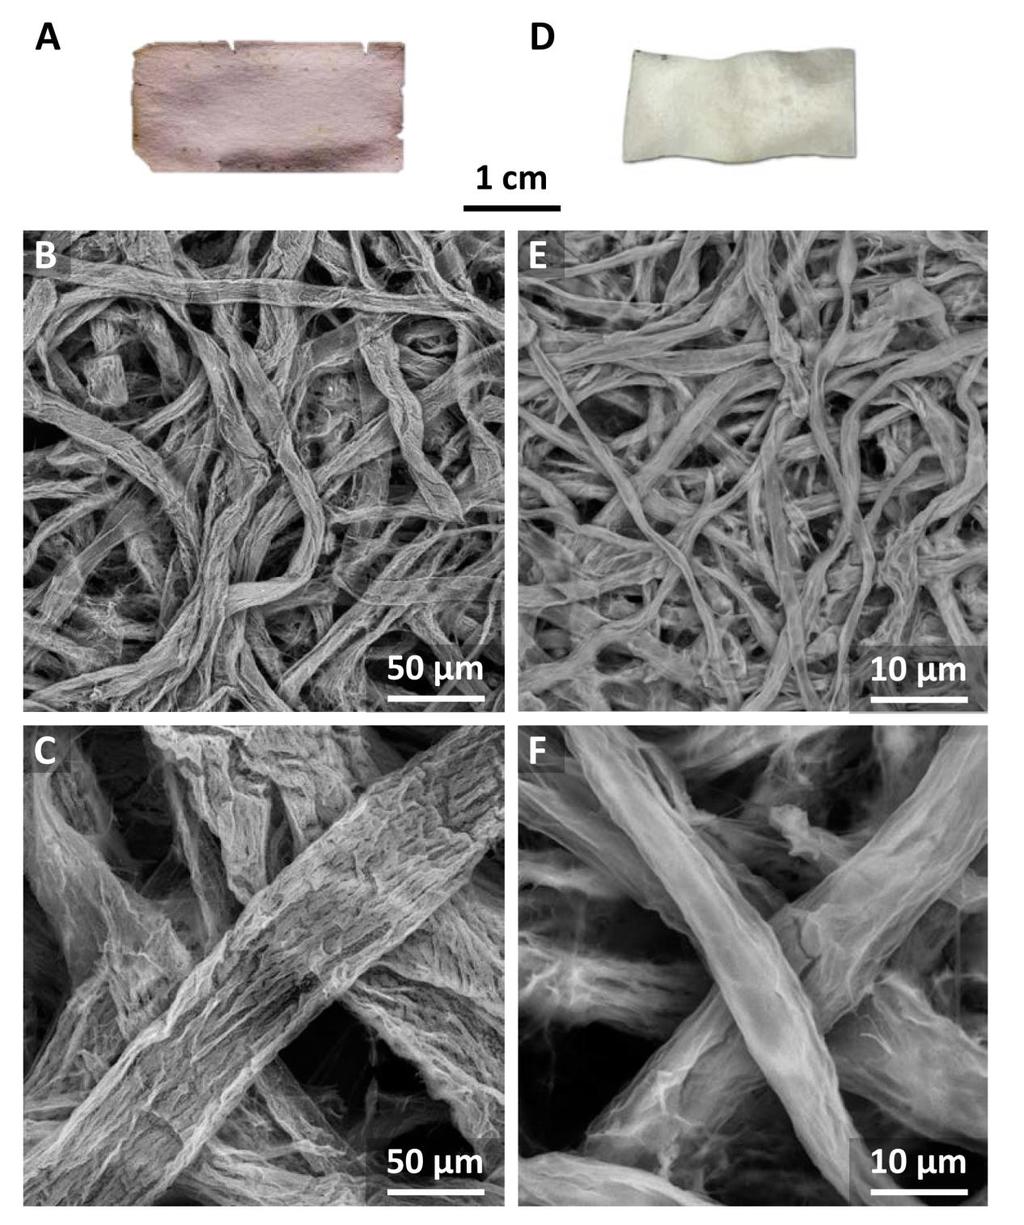 Figure S-12: Photo of a paper-templated structure composed of TiO2 (A) and two SEM images of the structure at two different magnifications